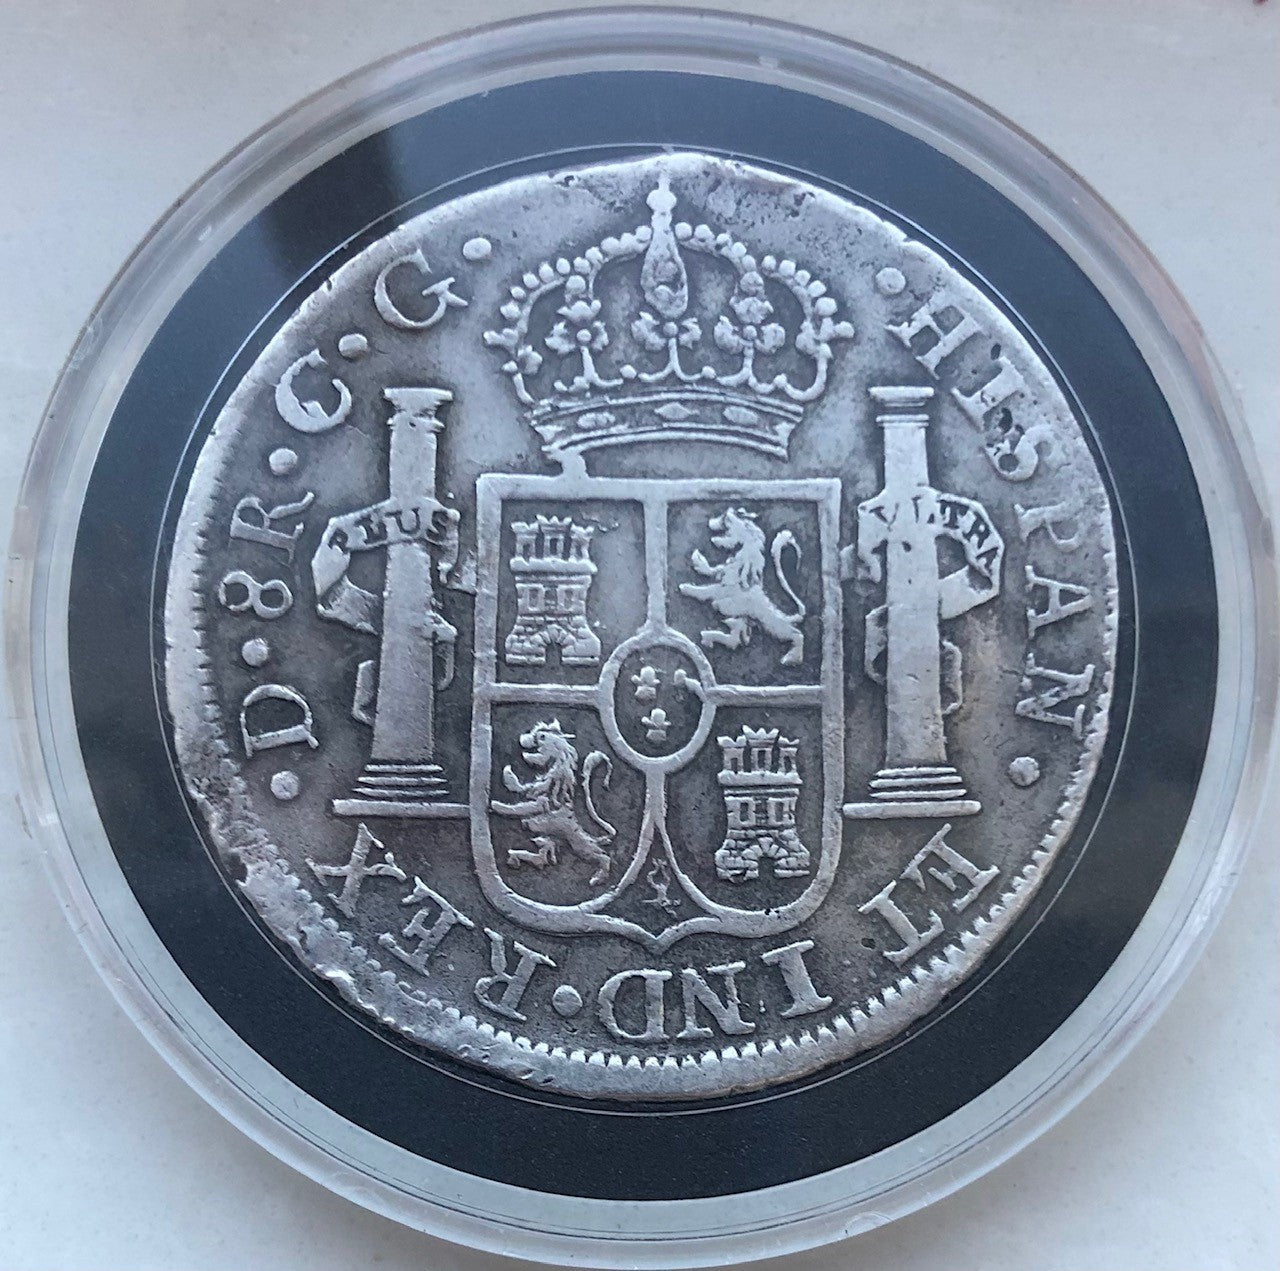 Reverse side of an 1821, 8-Reales silver coin